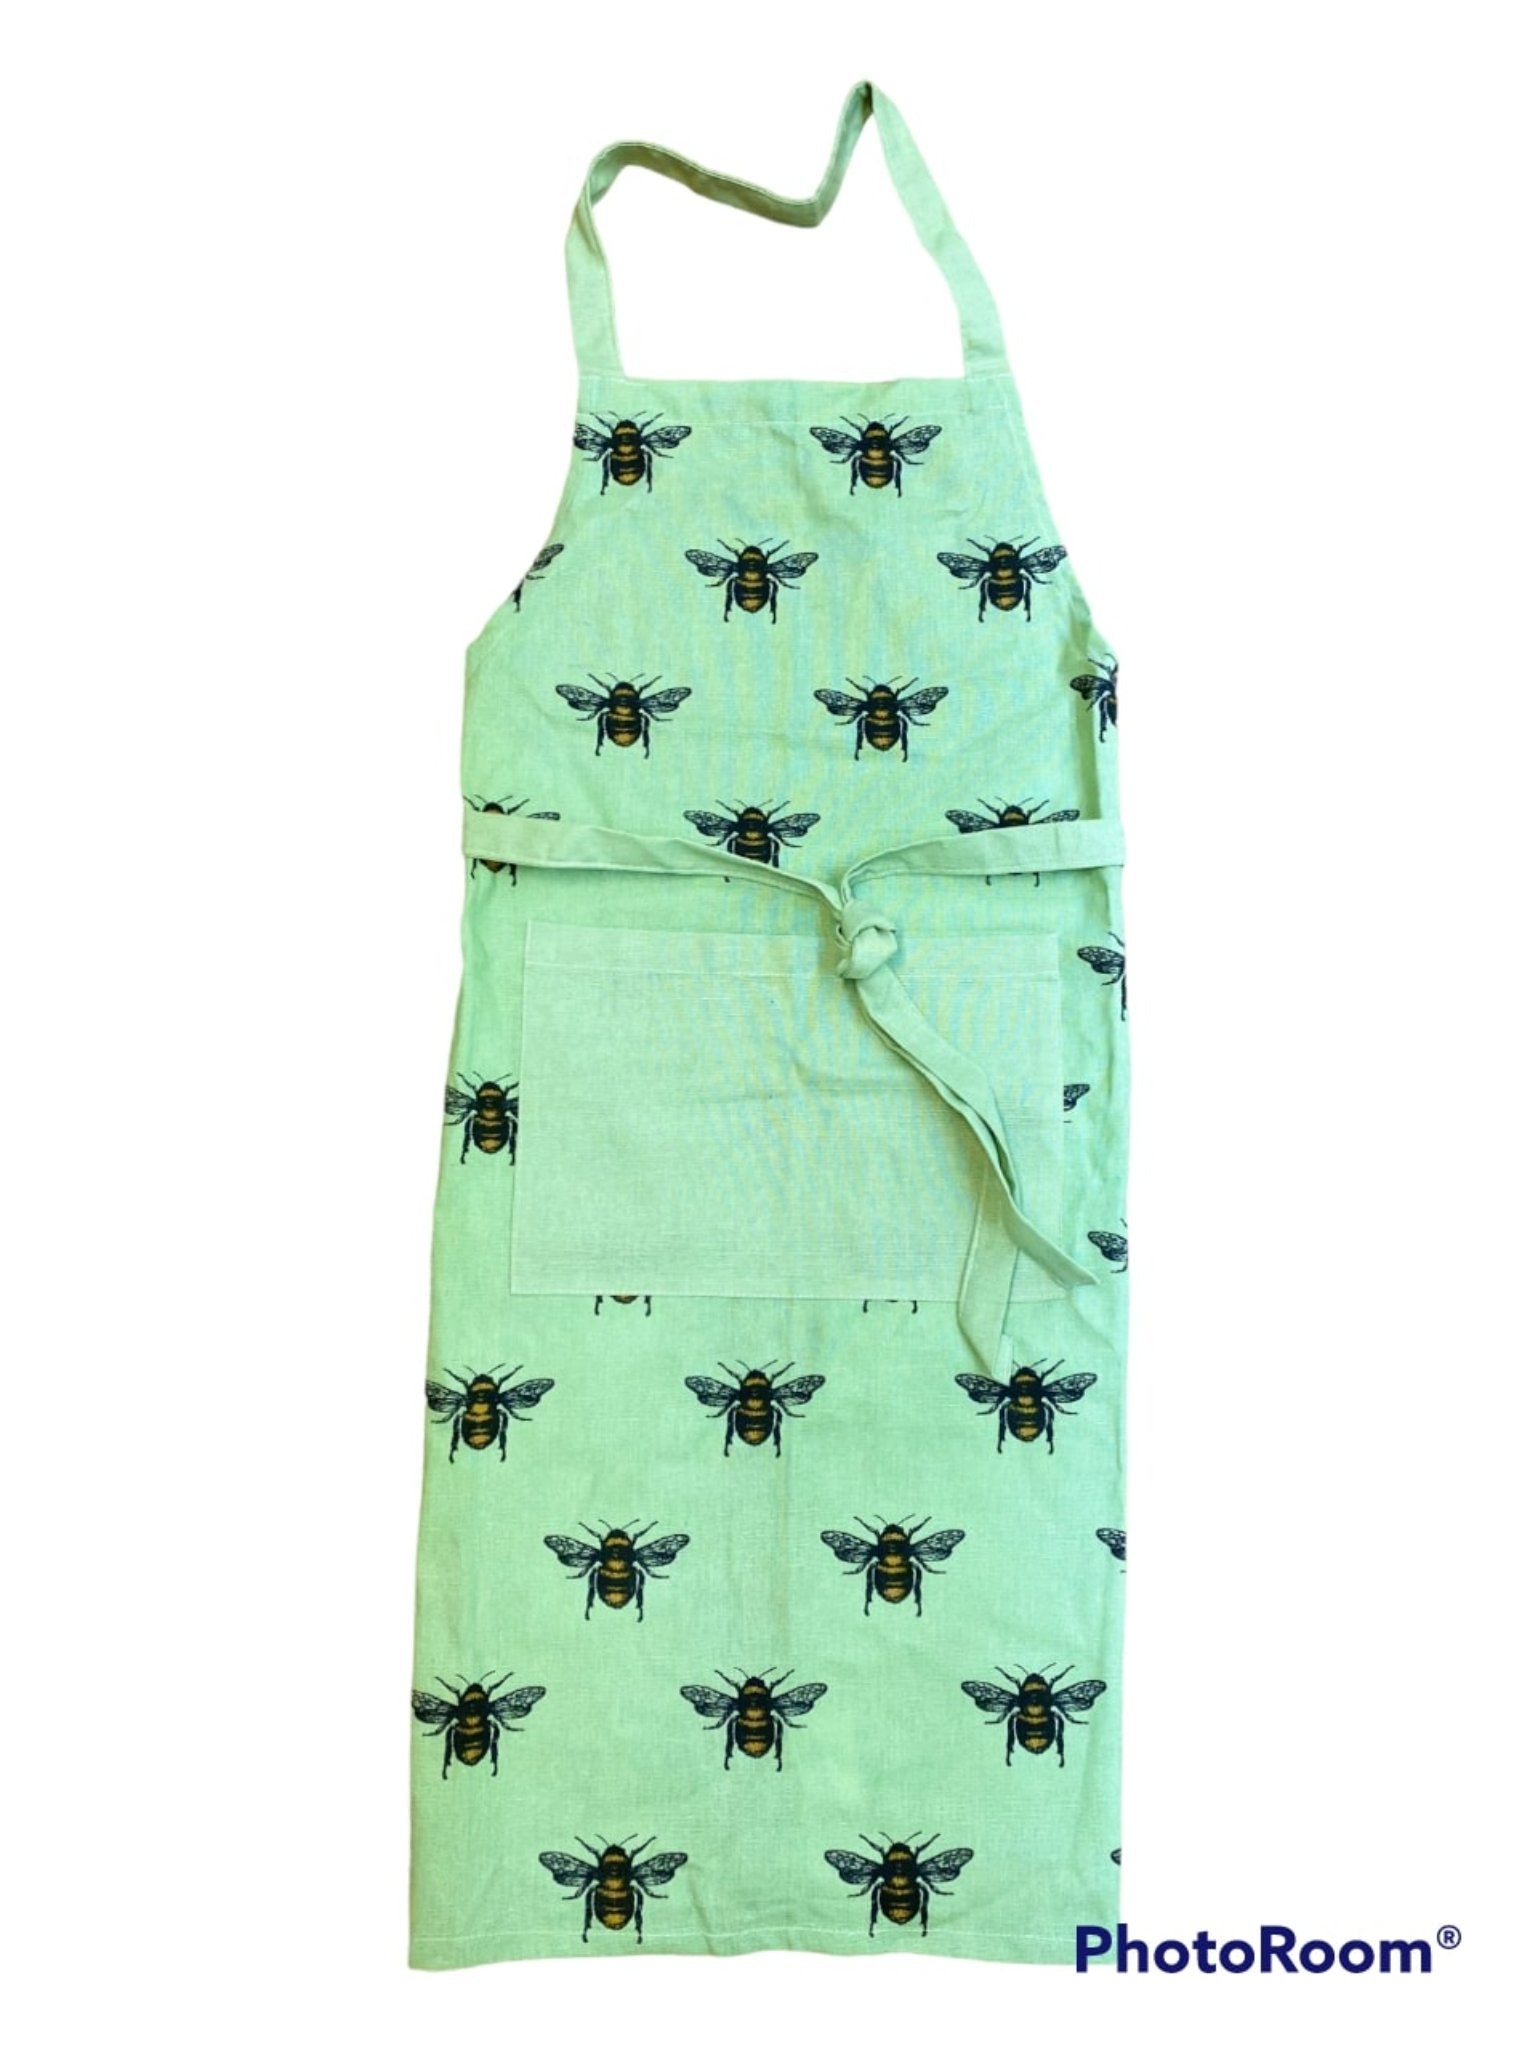 View Green Summer Bee Apron information